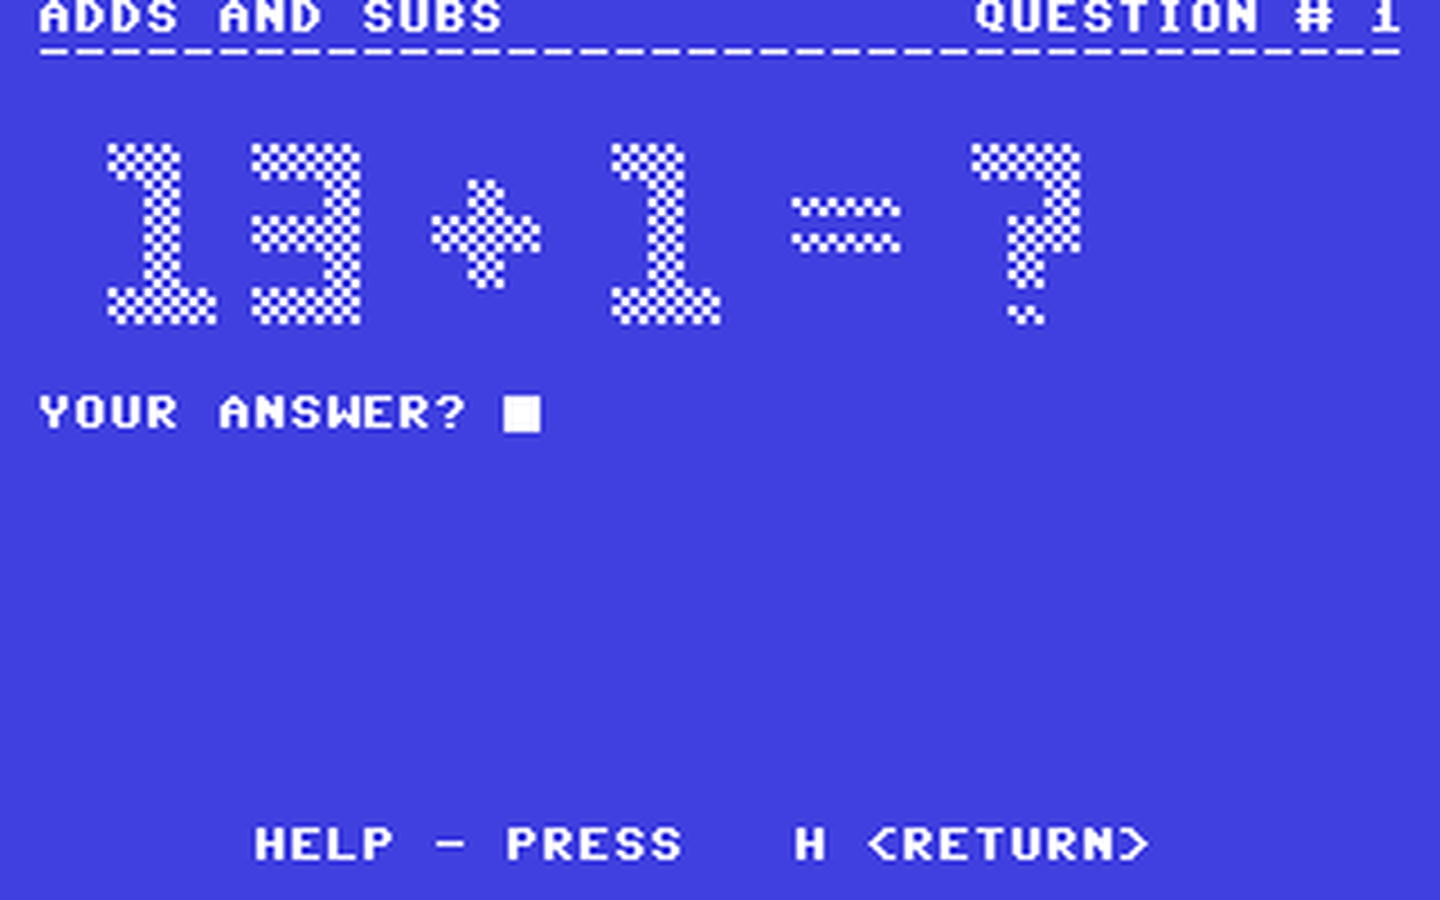 C64 GameBase Adds_and_Subs Commodore_Educational_Software 1982